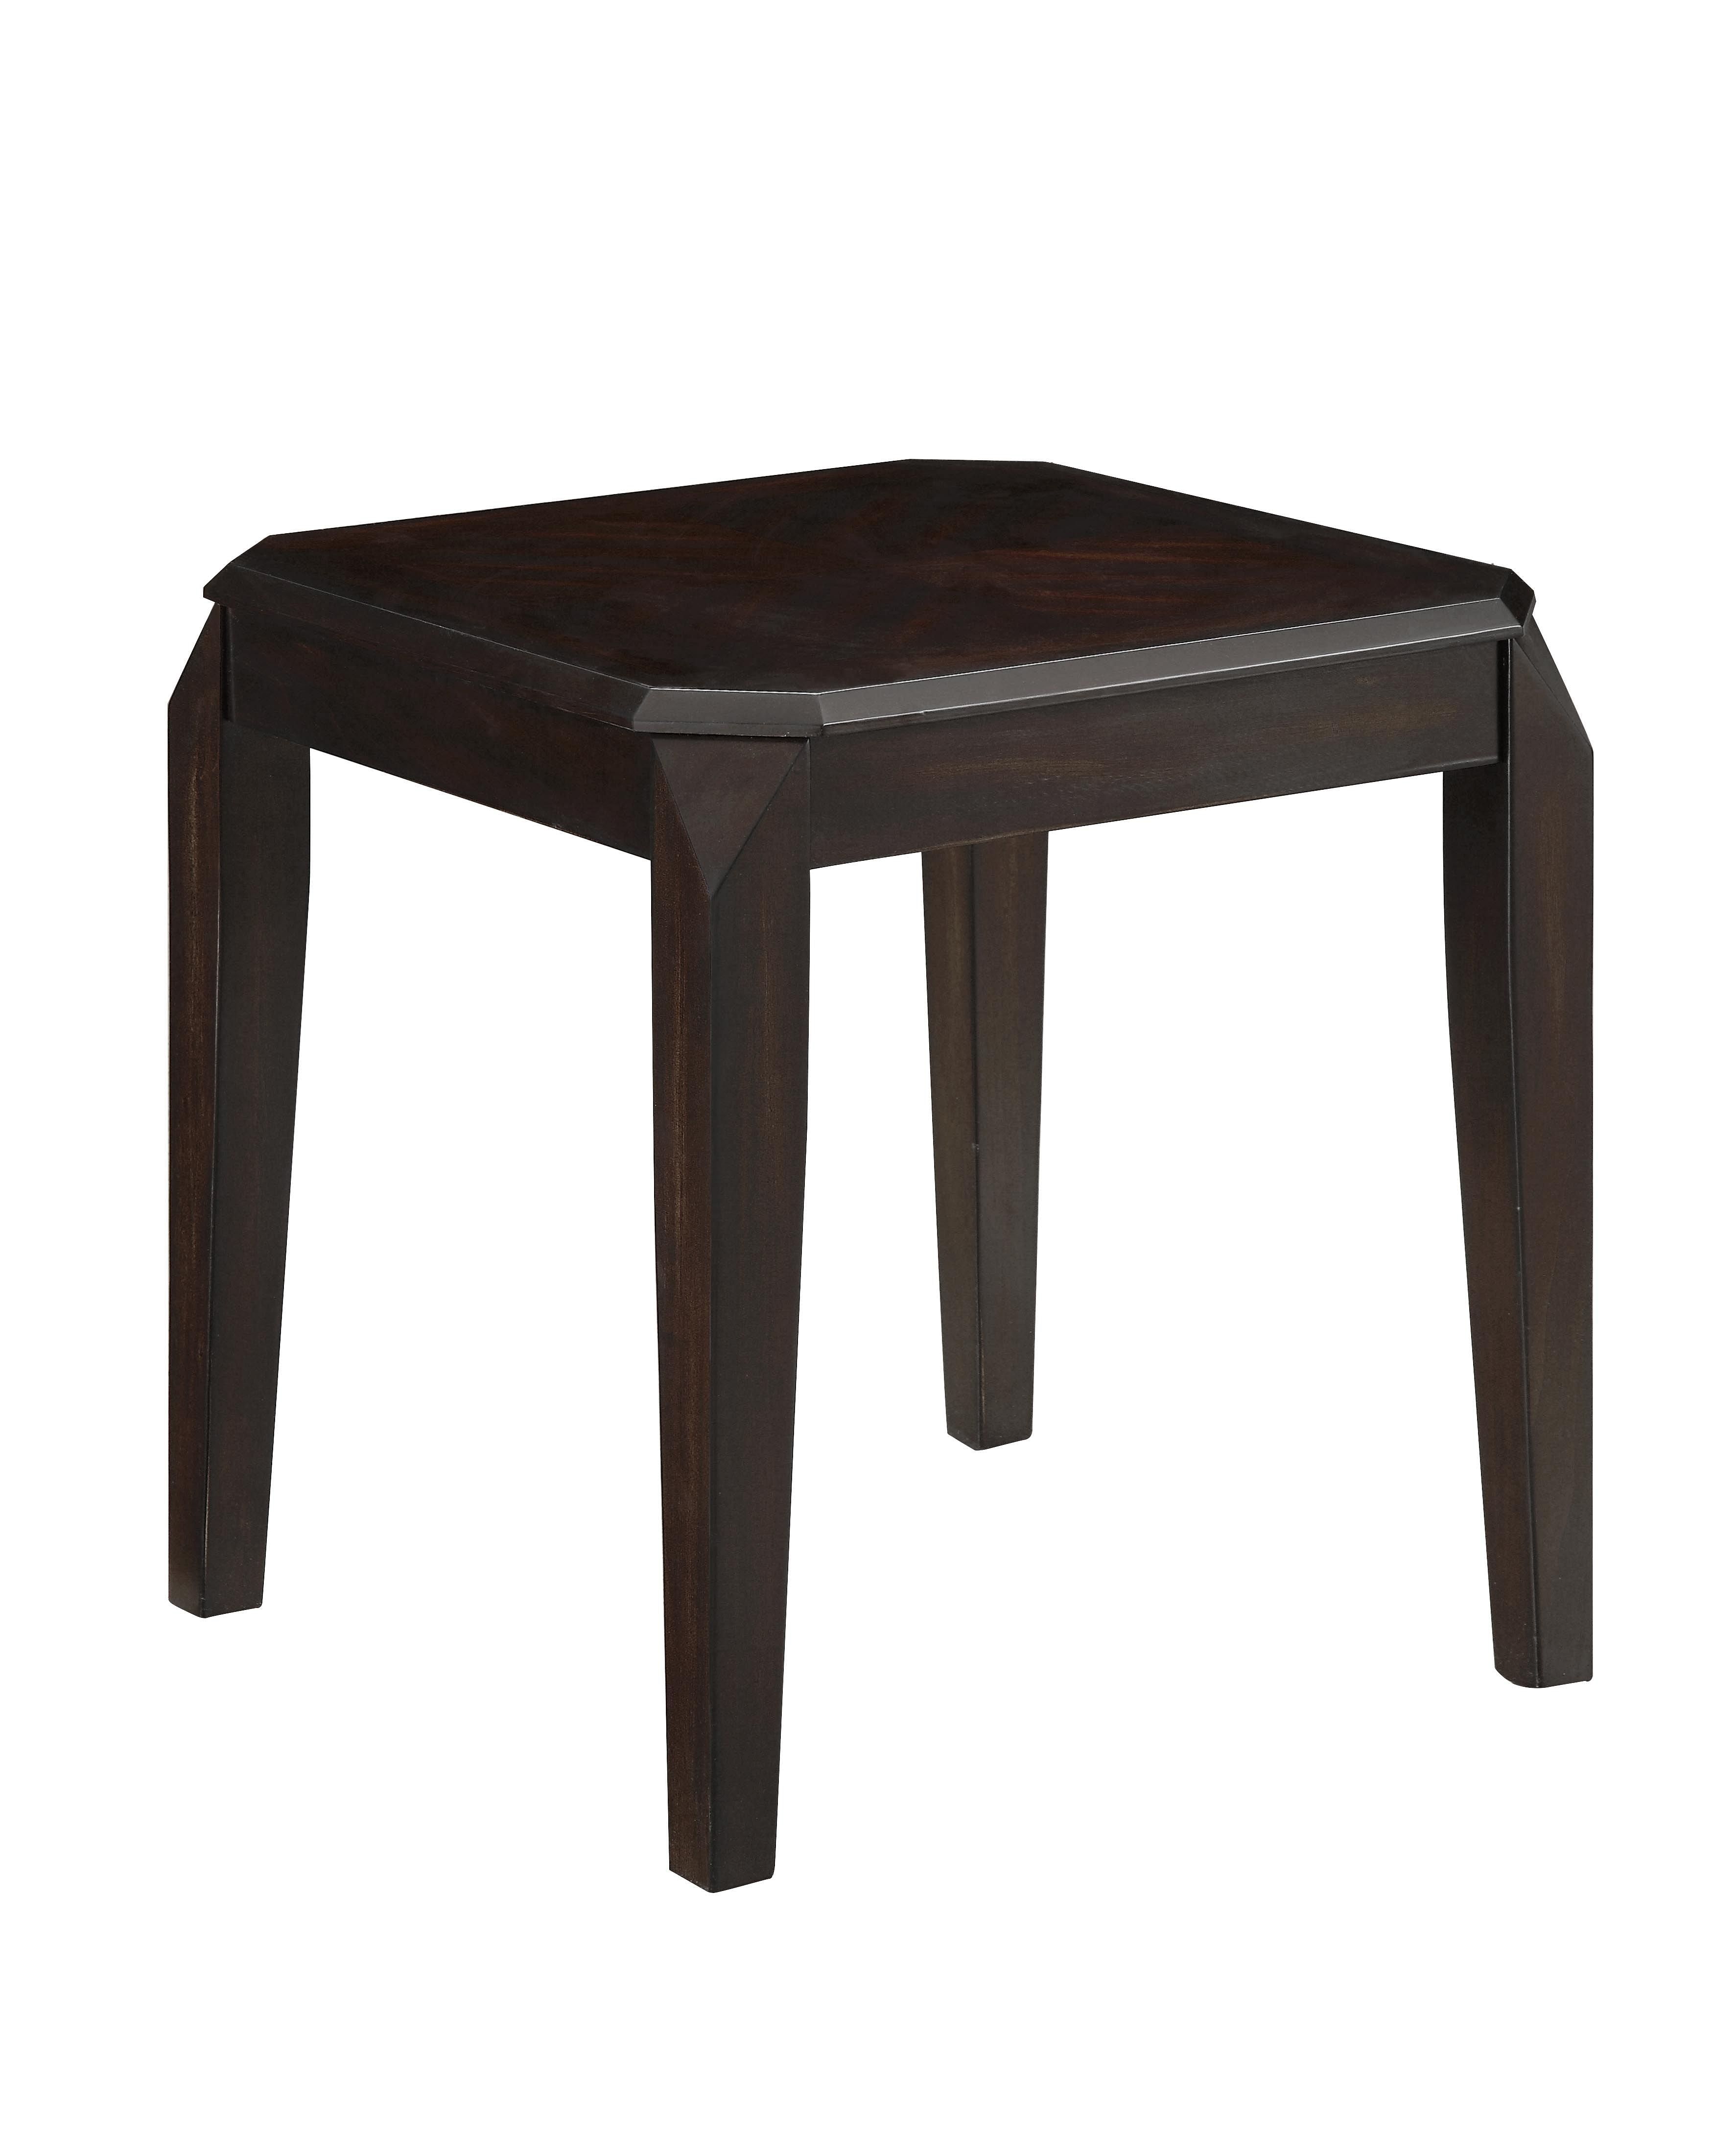 Coaster Living Room End Table 721047